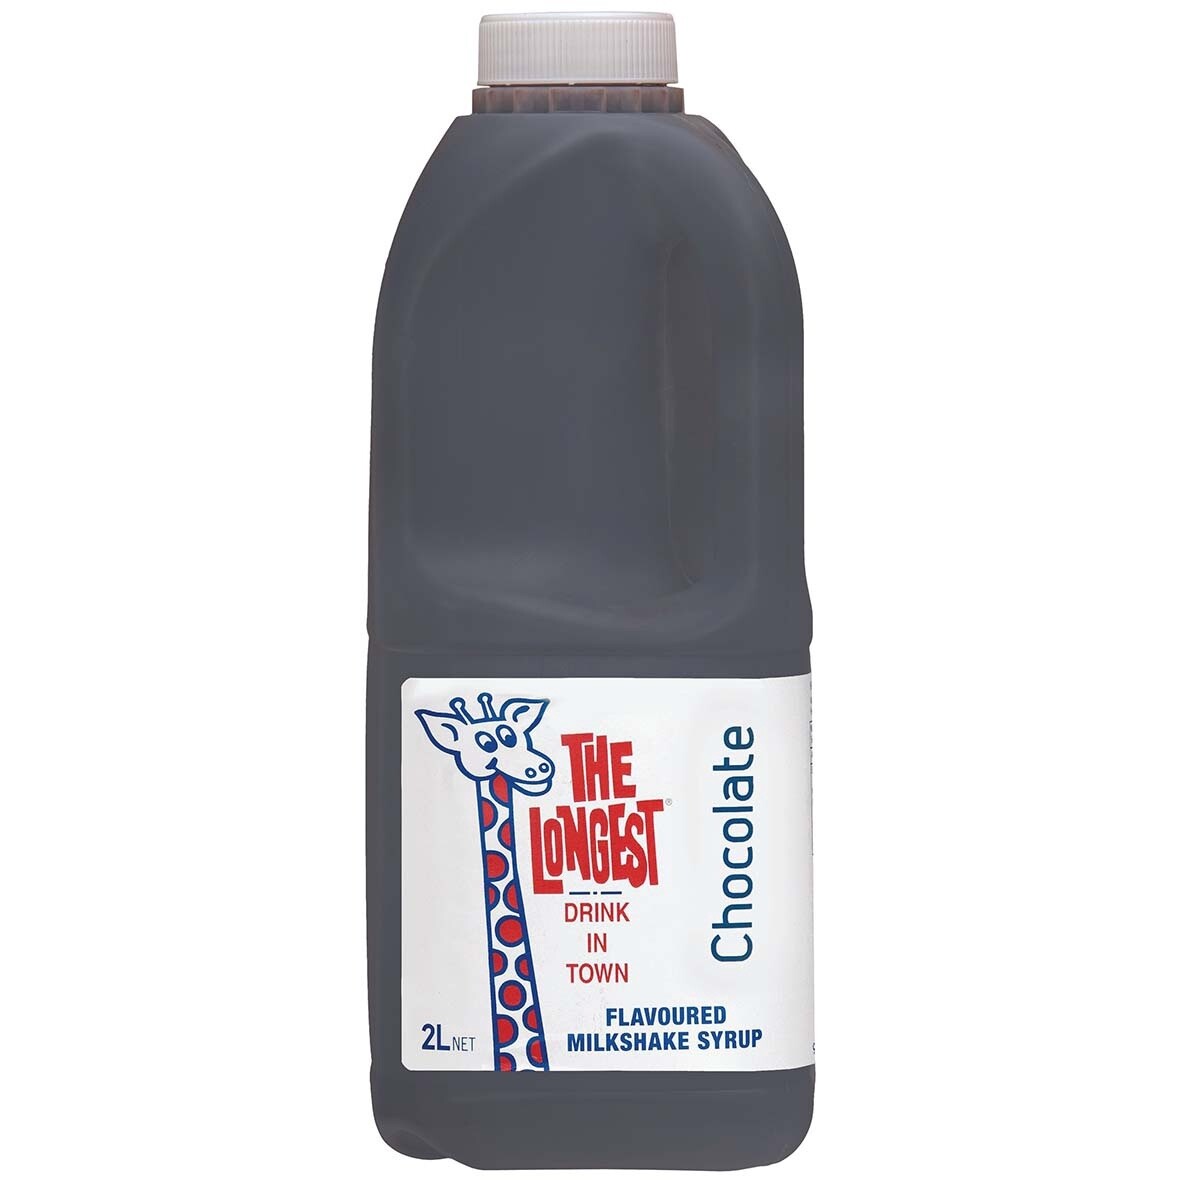 LDIT (Longest Drink In Town) Syrup